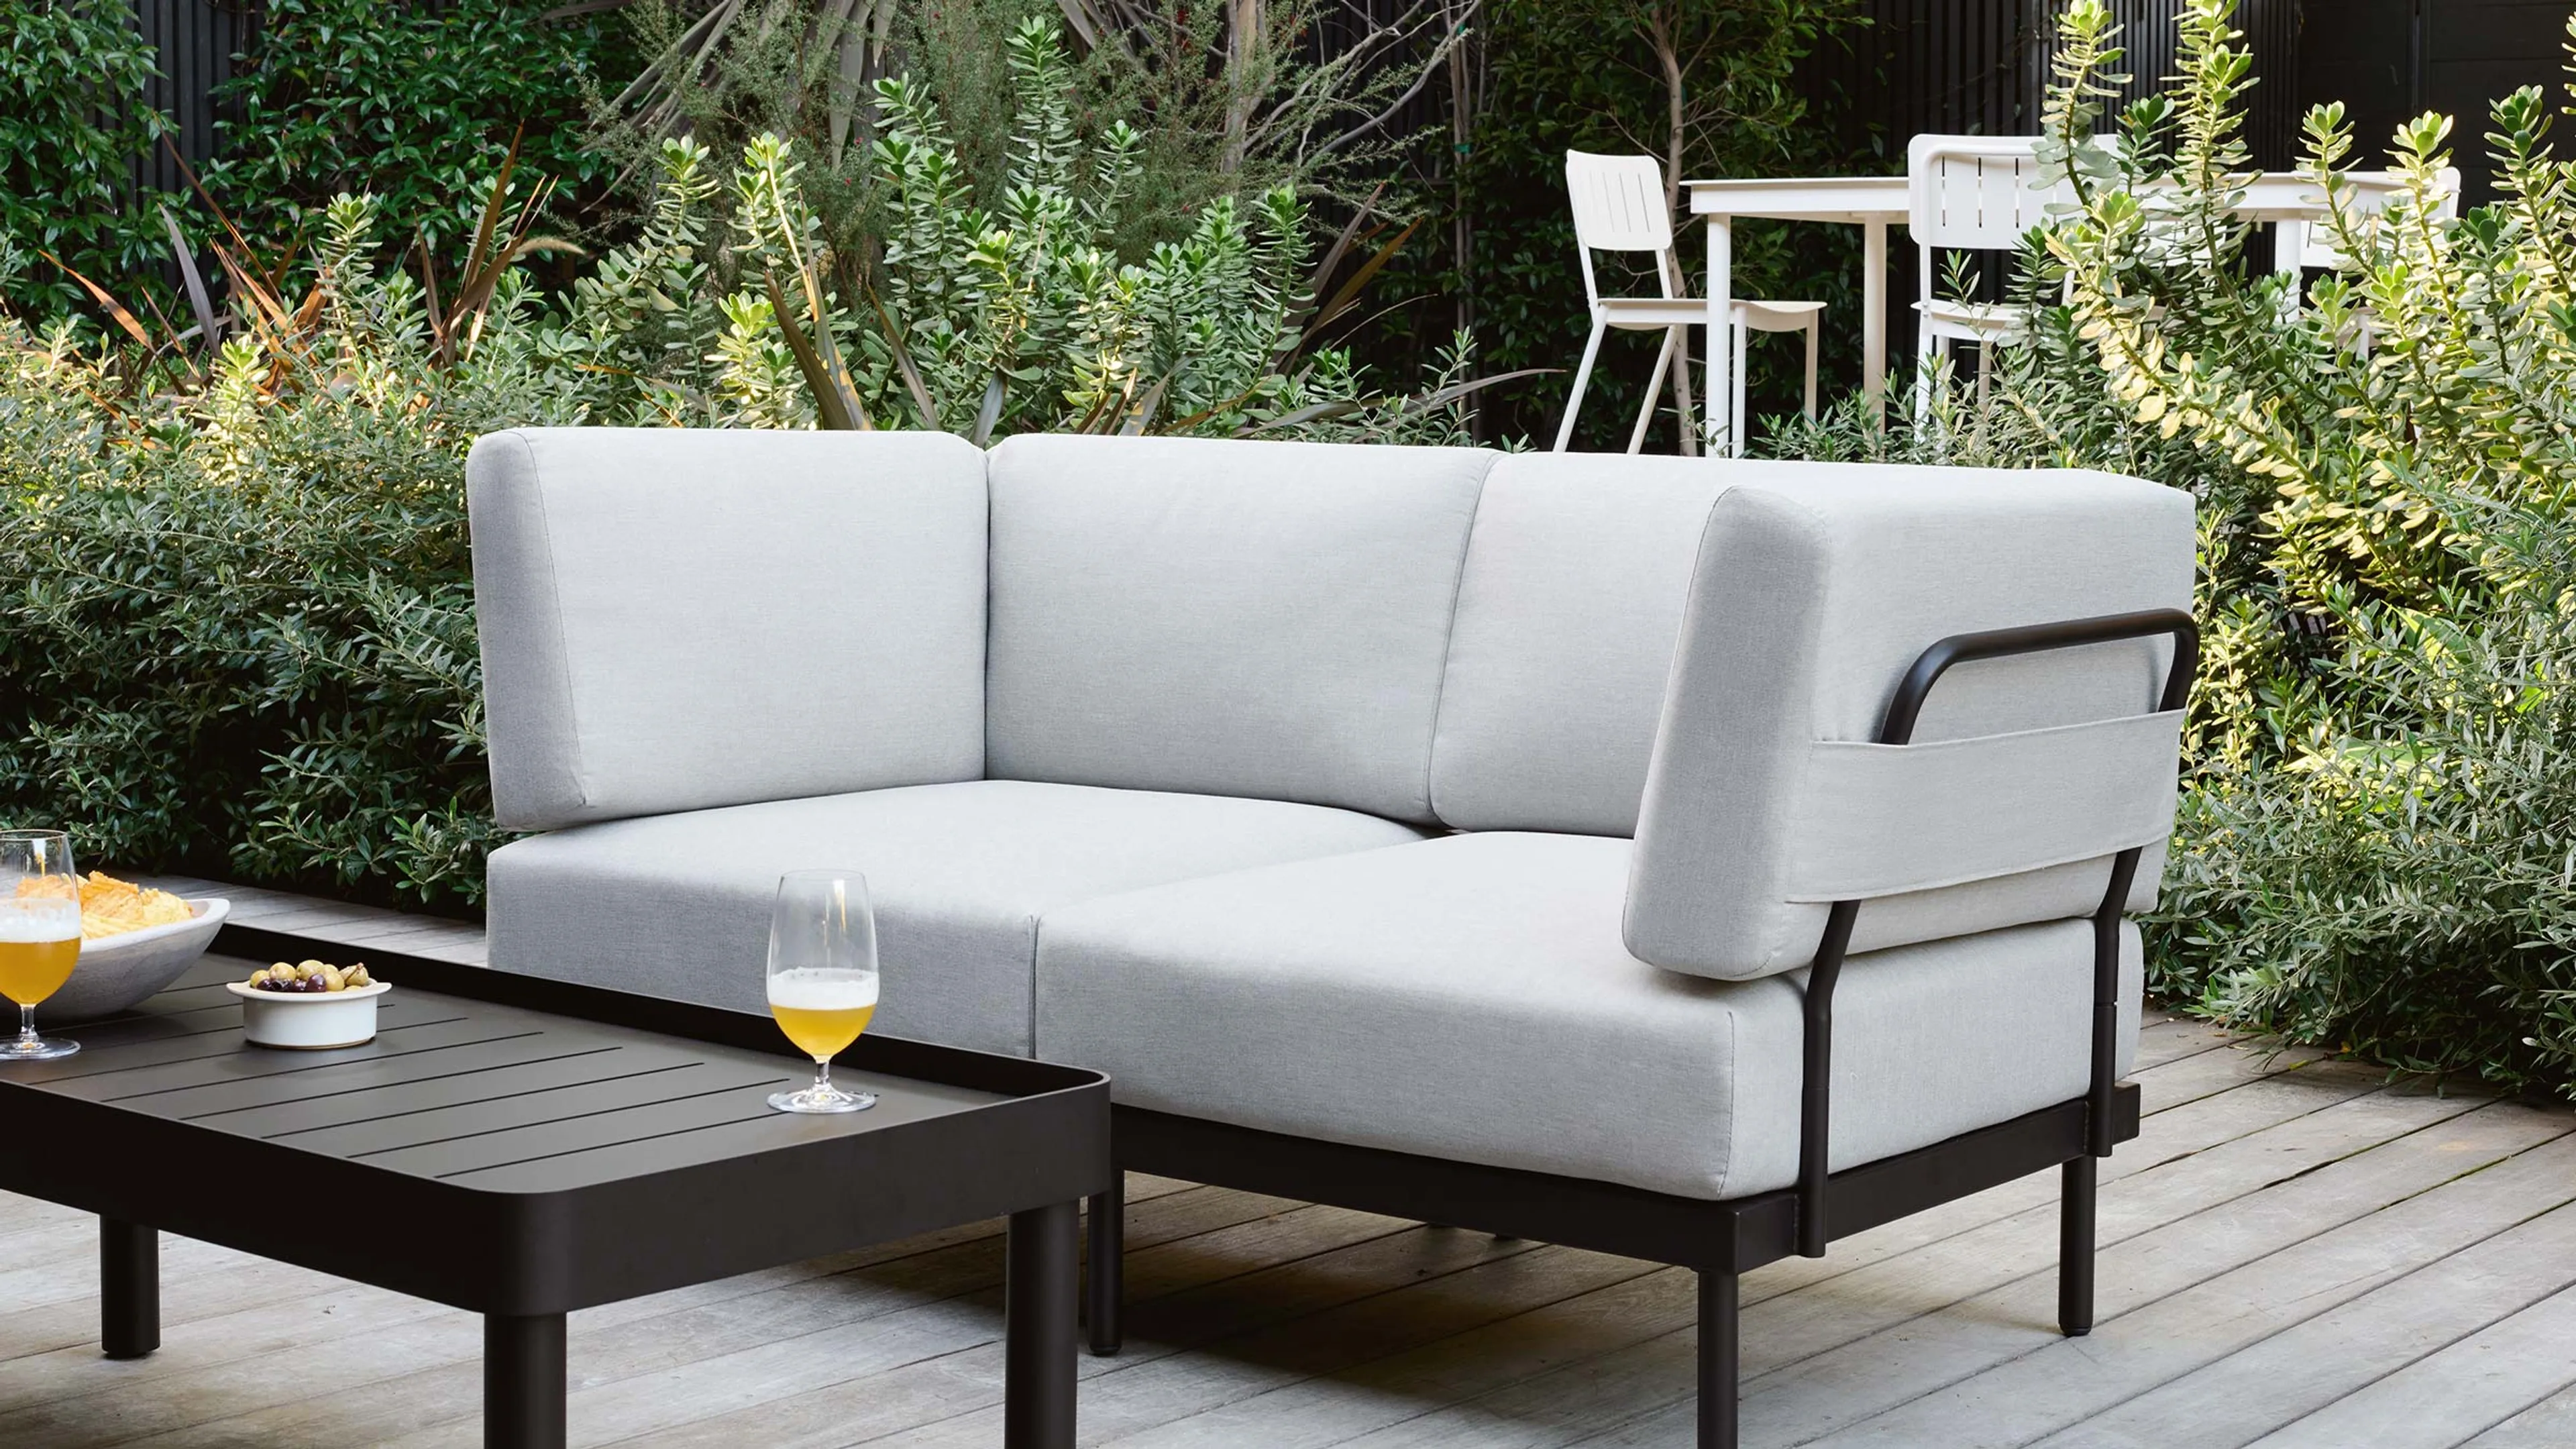 Relay Outdoor 2-Piece Sofa, 2 Chairs, & Coffee Table Set